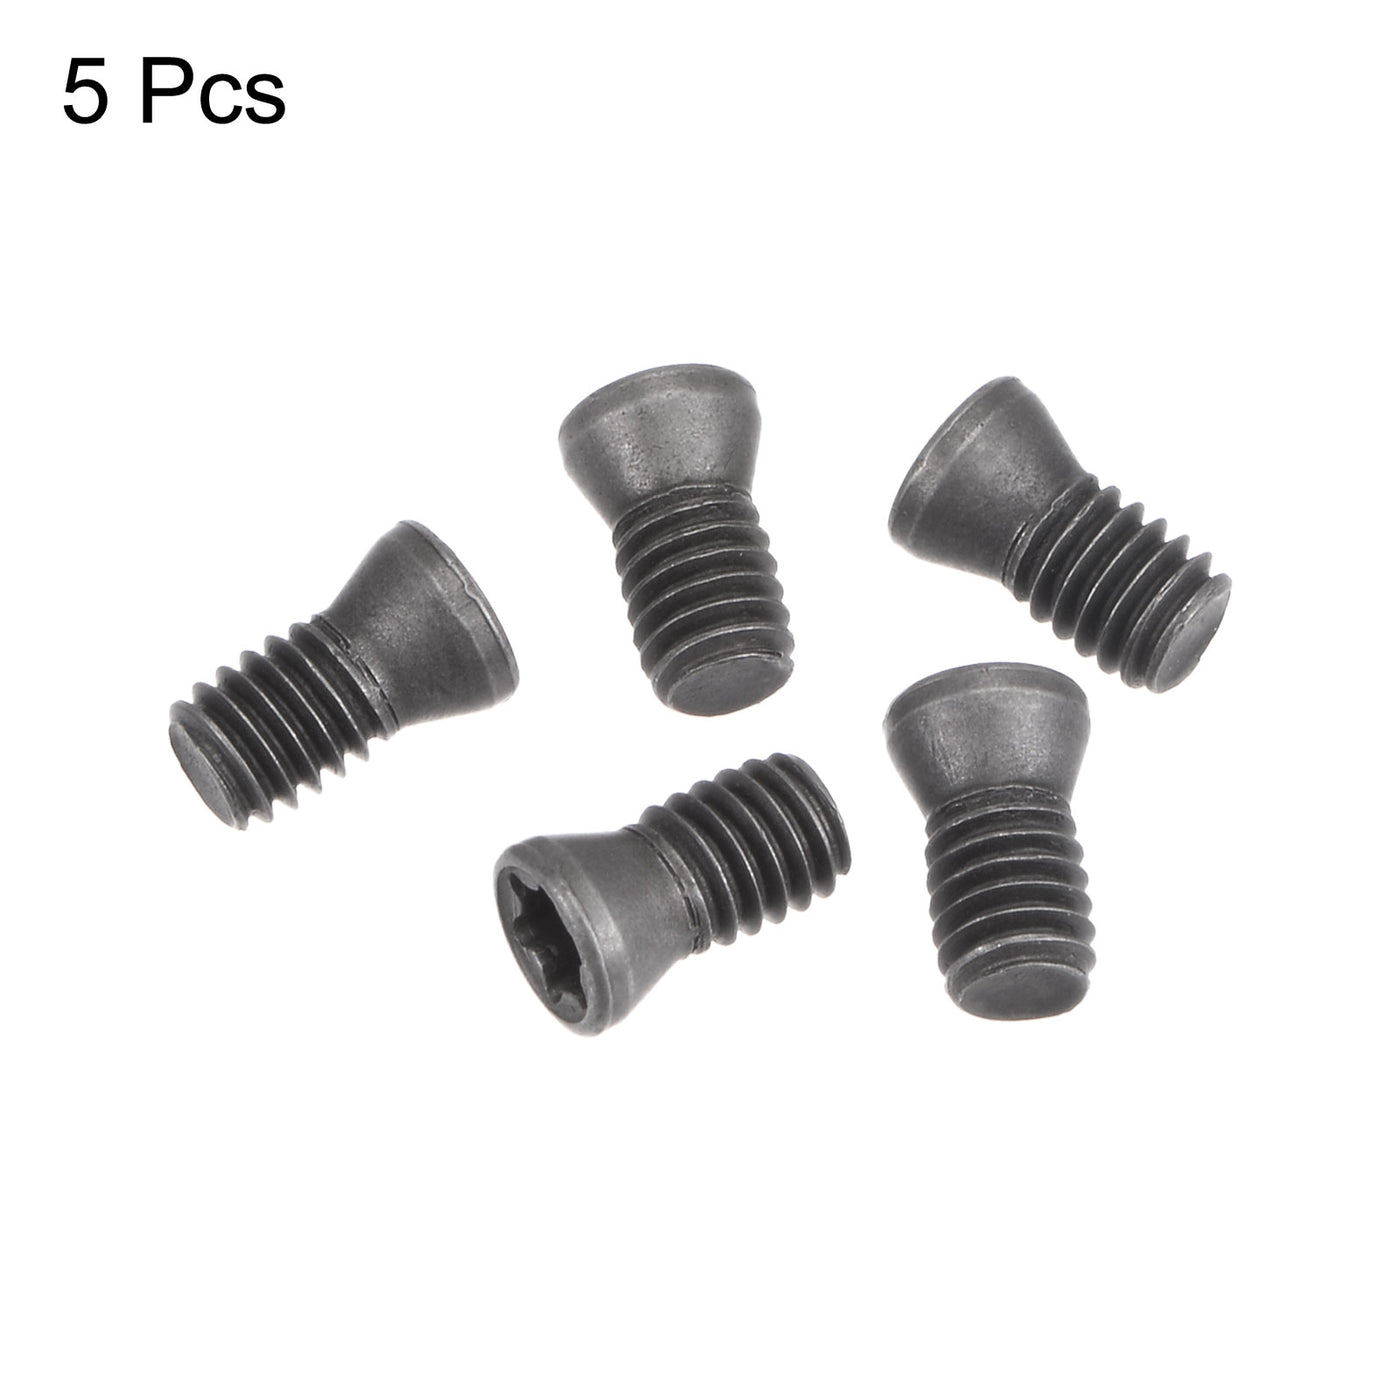 uxcell Uxcell M4x8-D5.0 Torx Set Screws for CNC Lathe Turning Tool Holder, 5Pcs